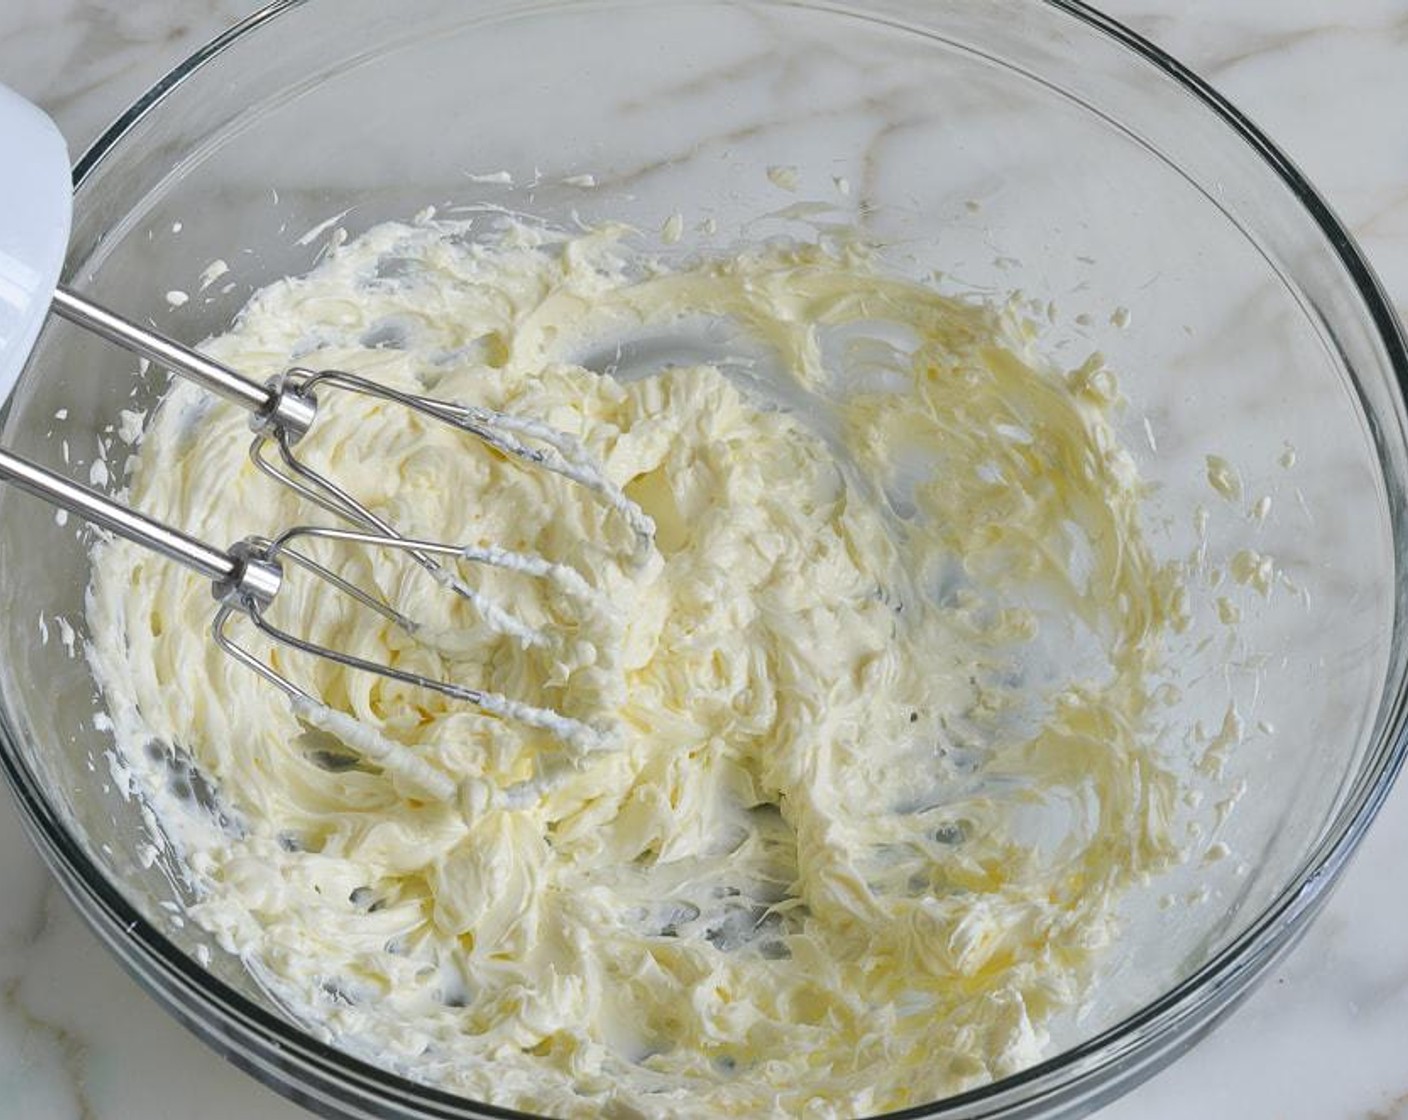 step 6 In the bowl of an electric mixer, beat the Cream Cheese (1 cup) until light and creamy, about 1 minute.